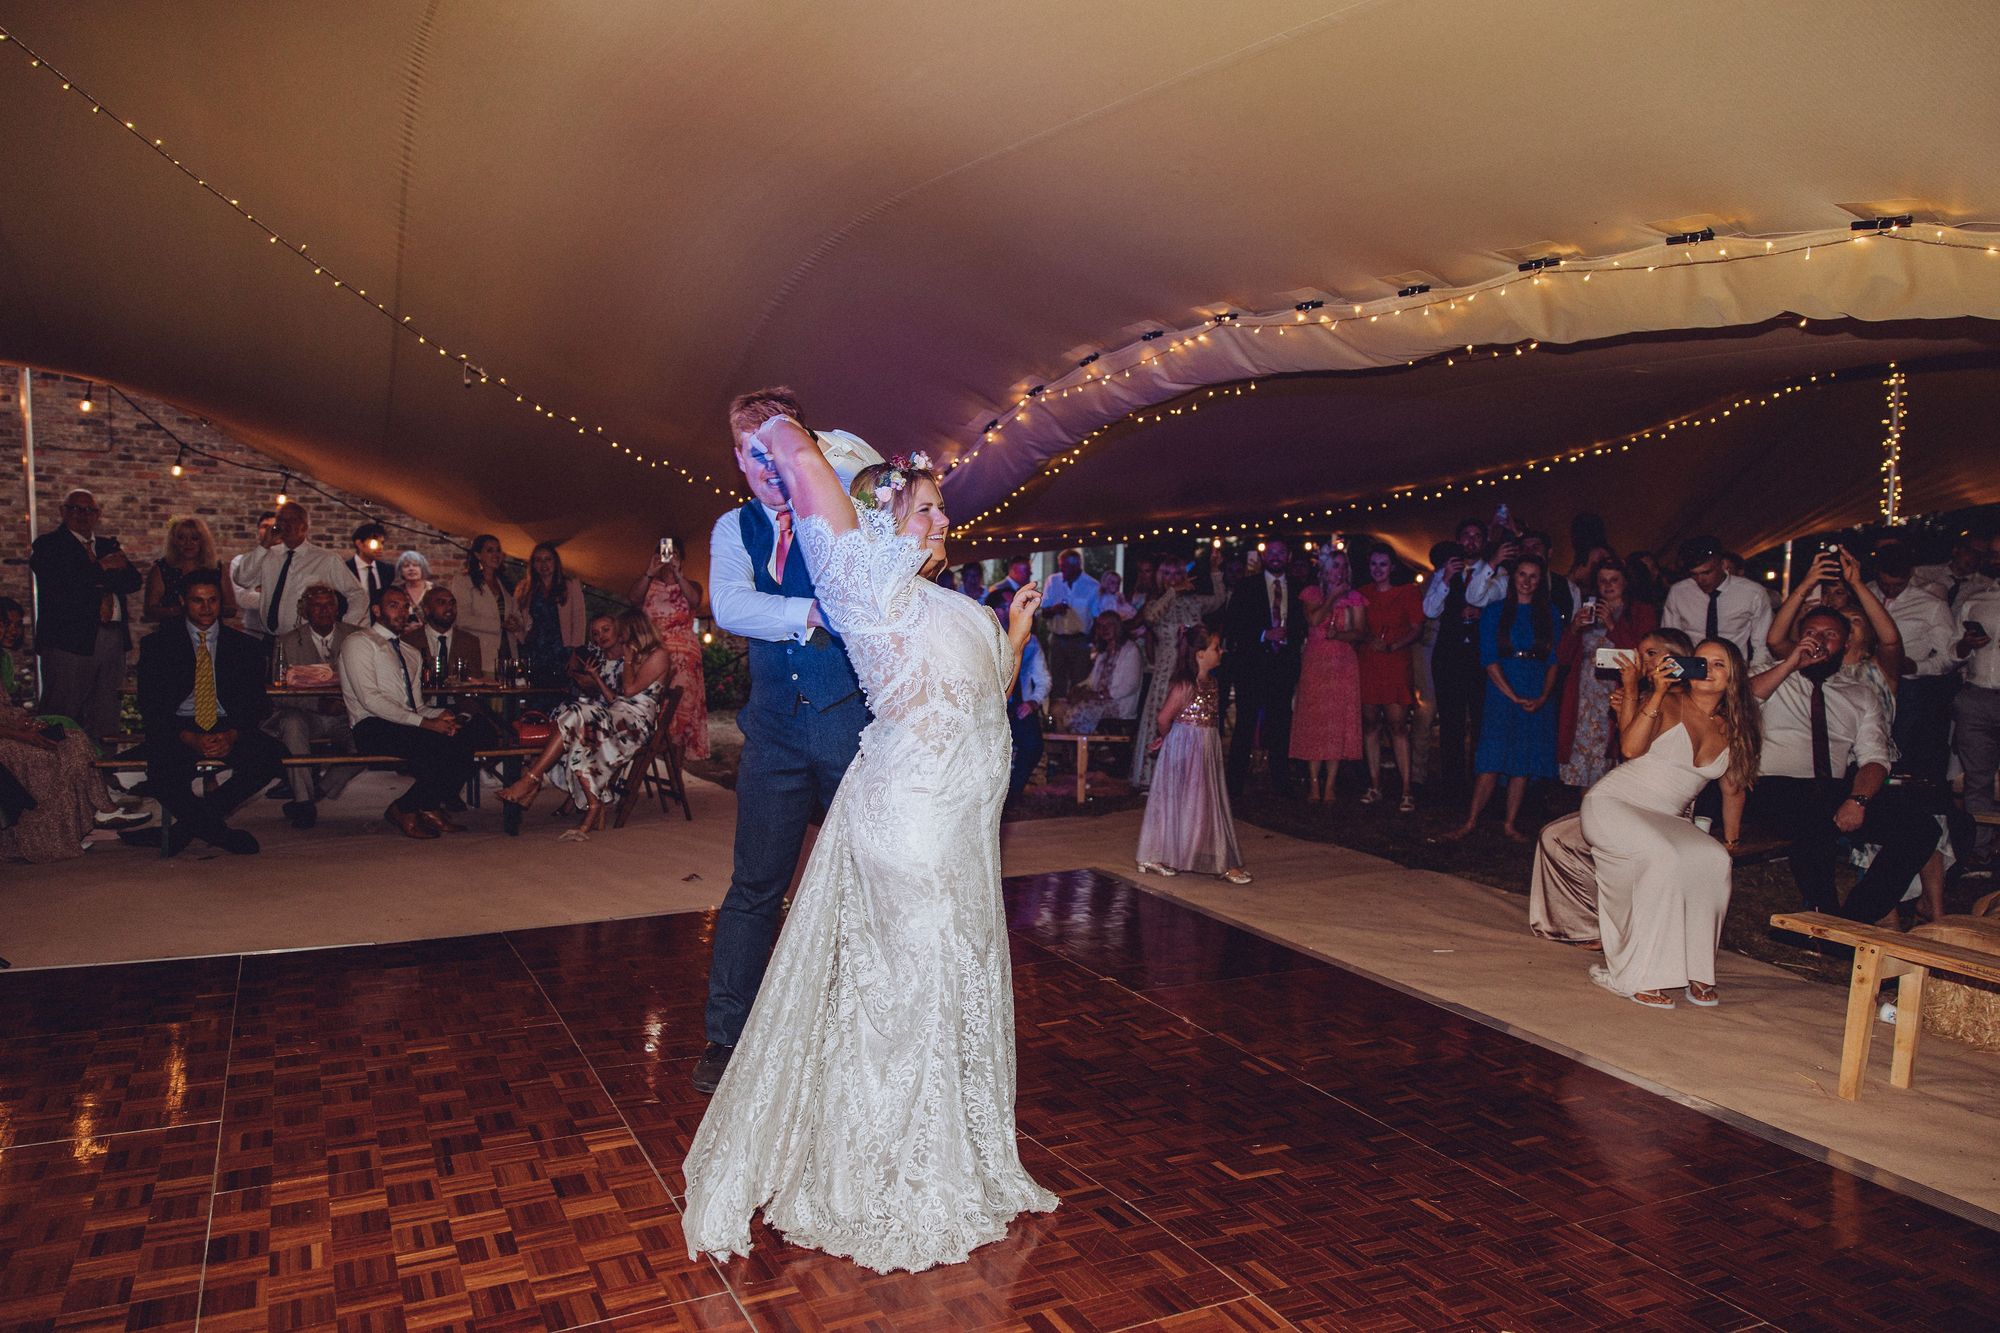 Nor and Dan dancing their first dance as a married couple in their tipi wedding. Photo thanks to Fordtography weddings.